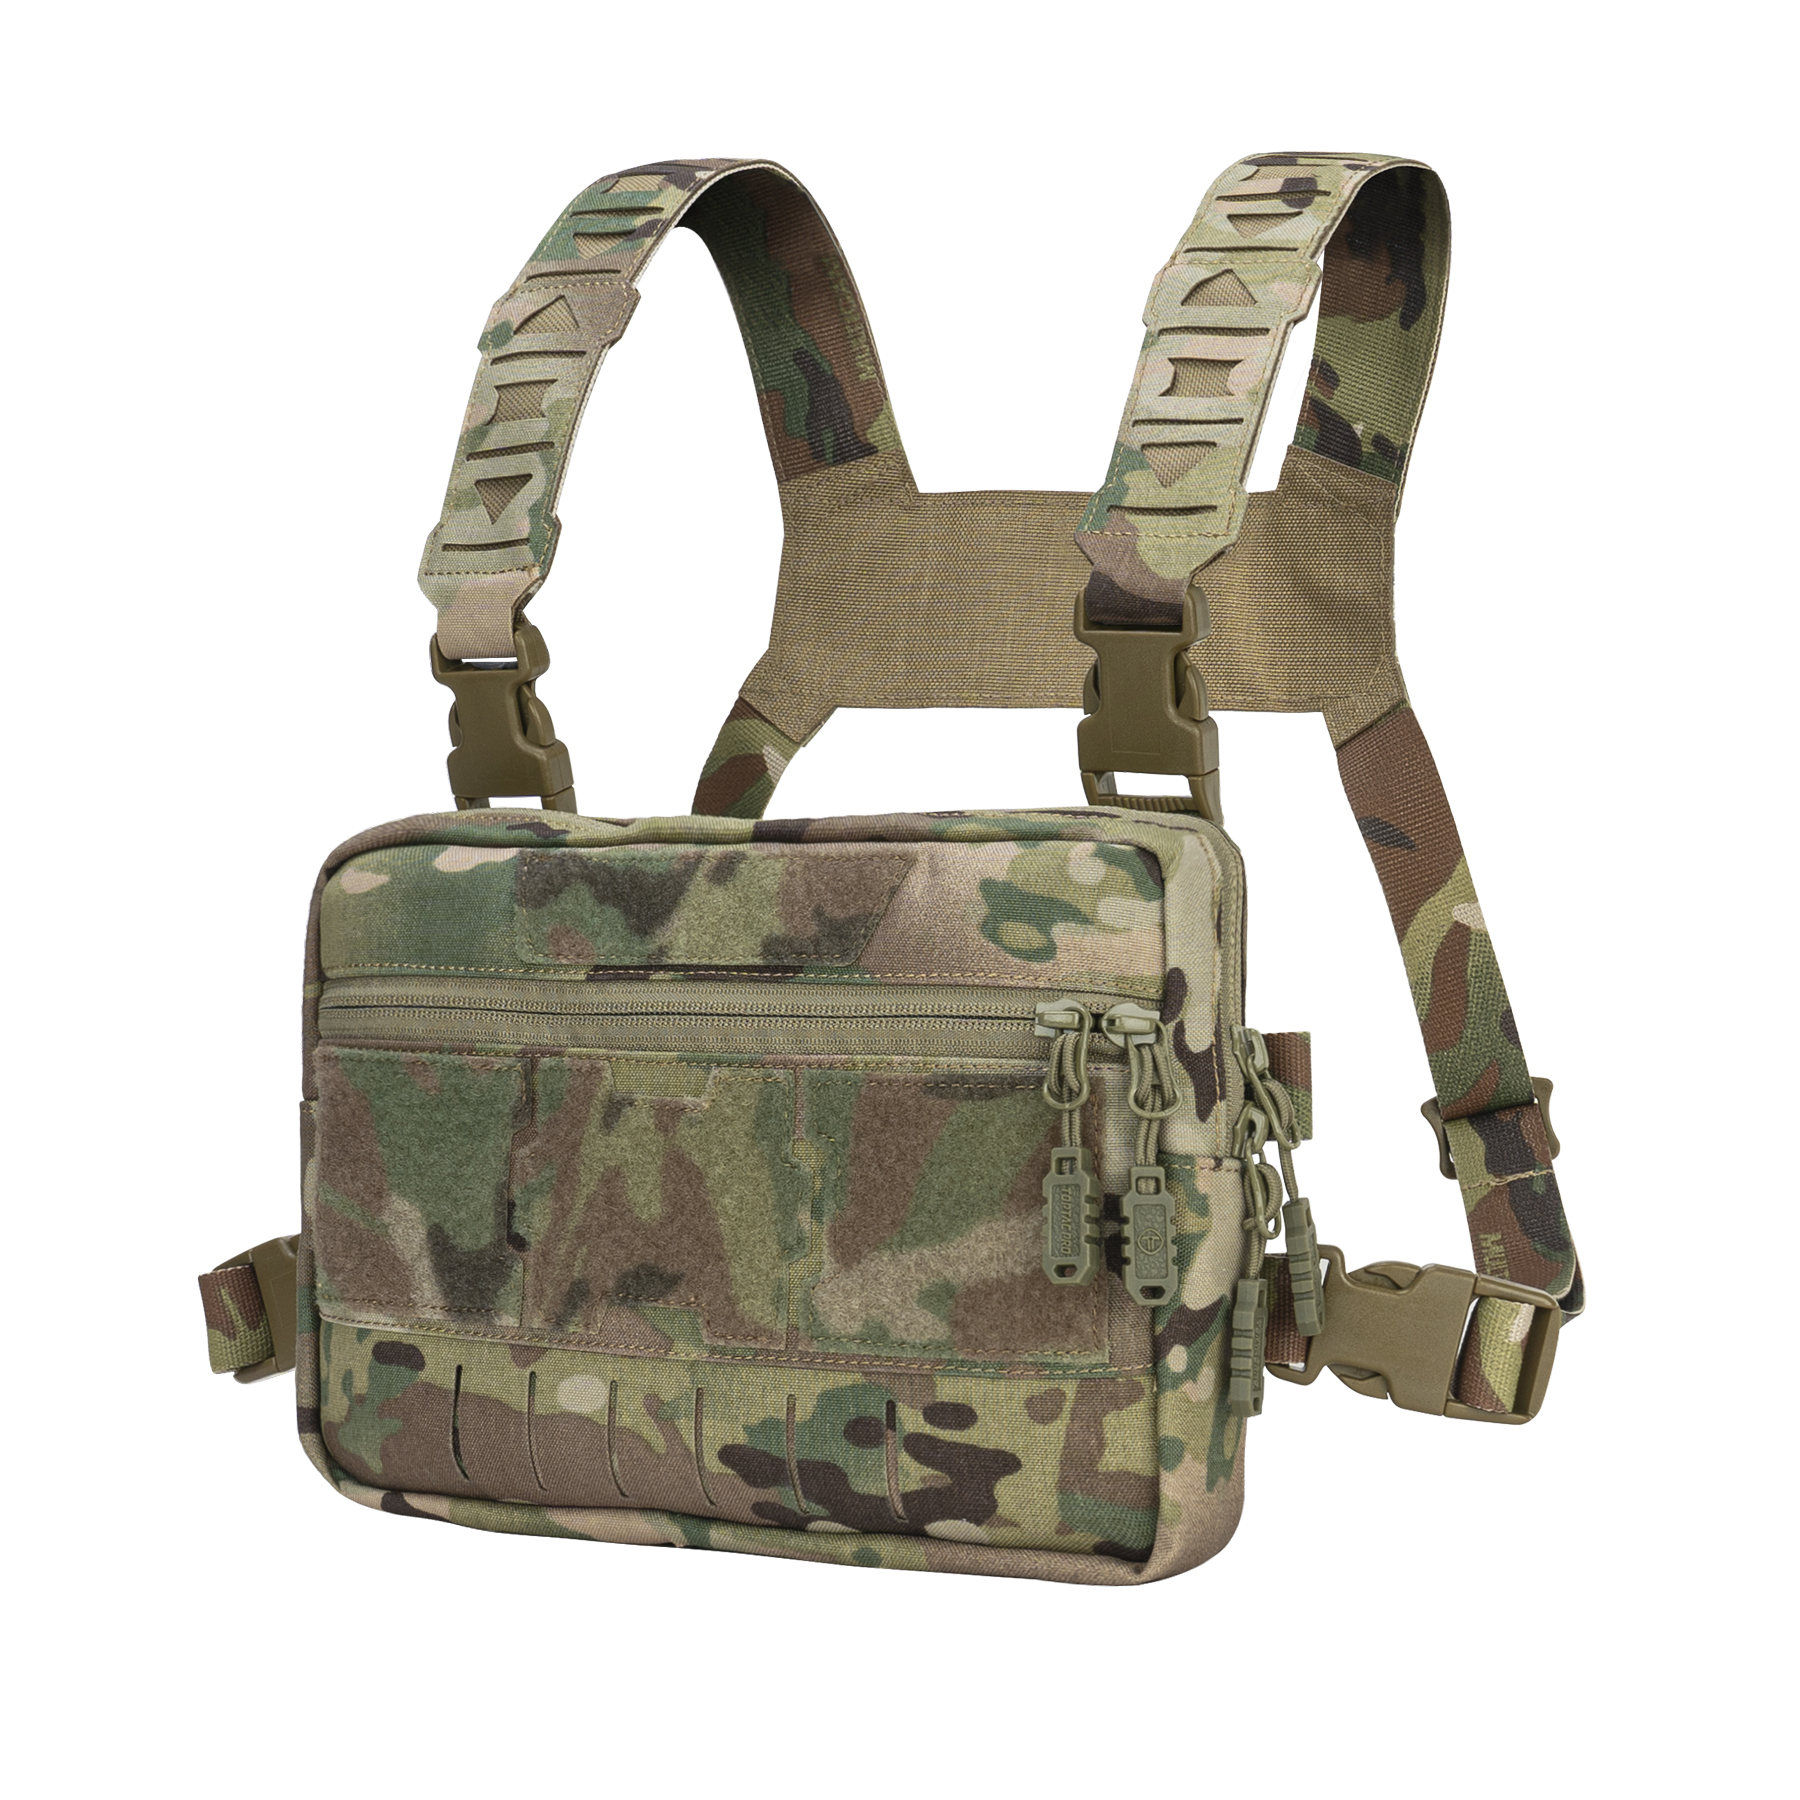 TOPTACPRO Tatcical Chest Rig Bag Chest Recon Bag MOLLE Front Shoulder Strap  Pack